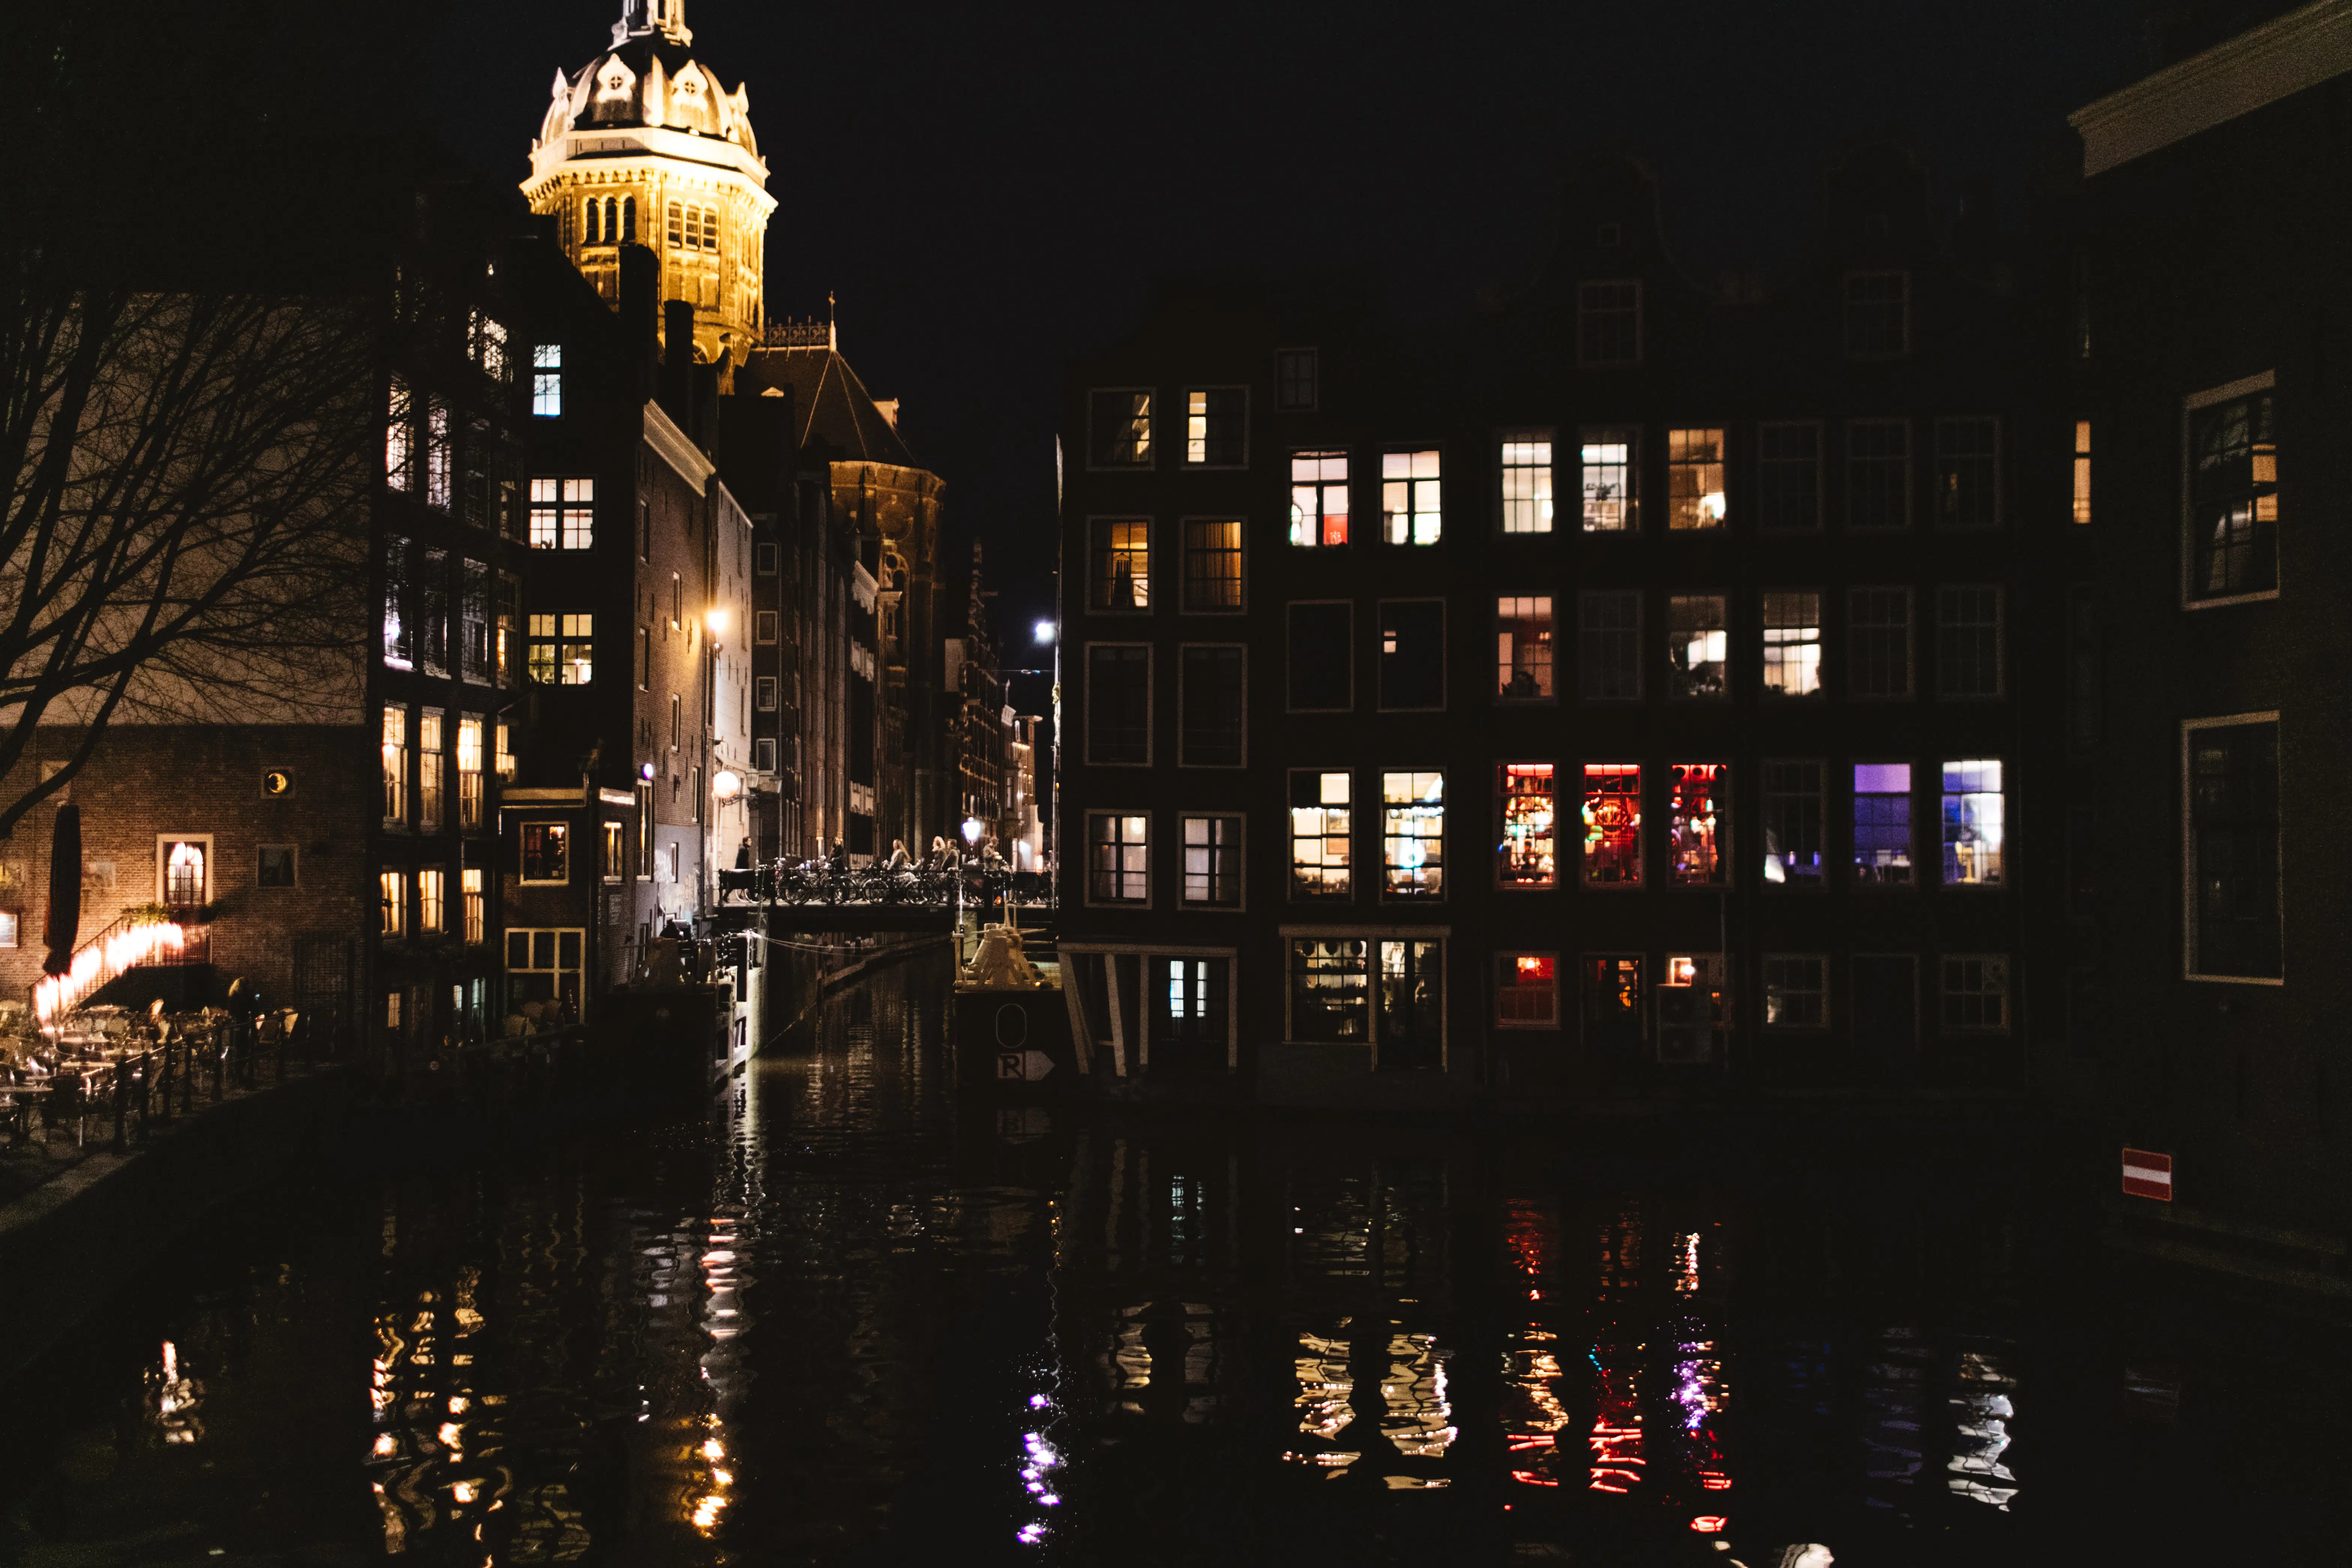 12 x The Best Club Nights in Amsterdam - May